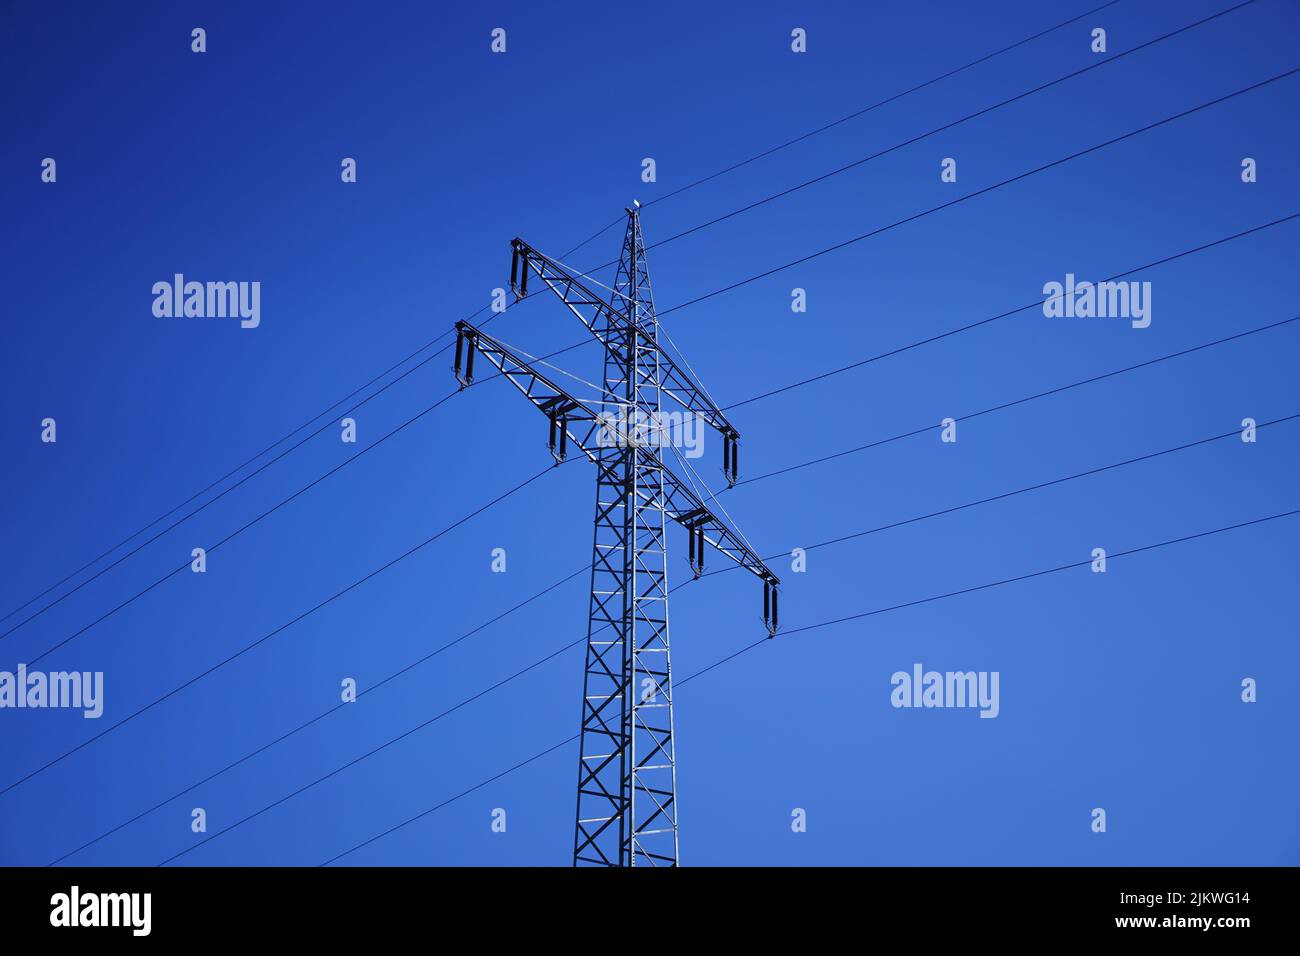 A low angle shot of a high voltage transmission tower against blue sky background Stock Photo